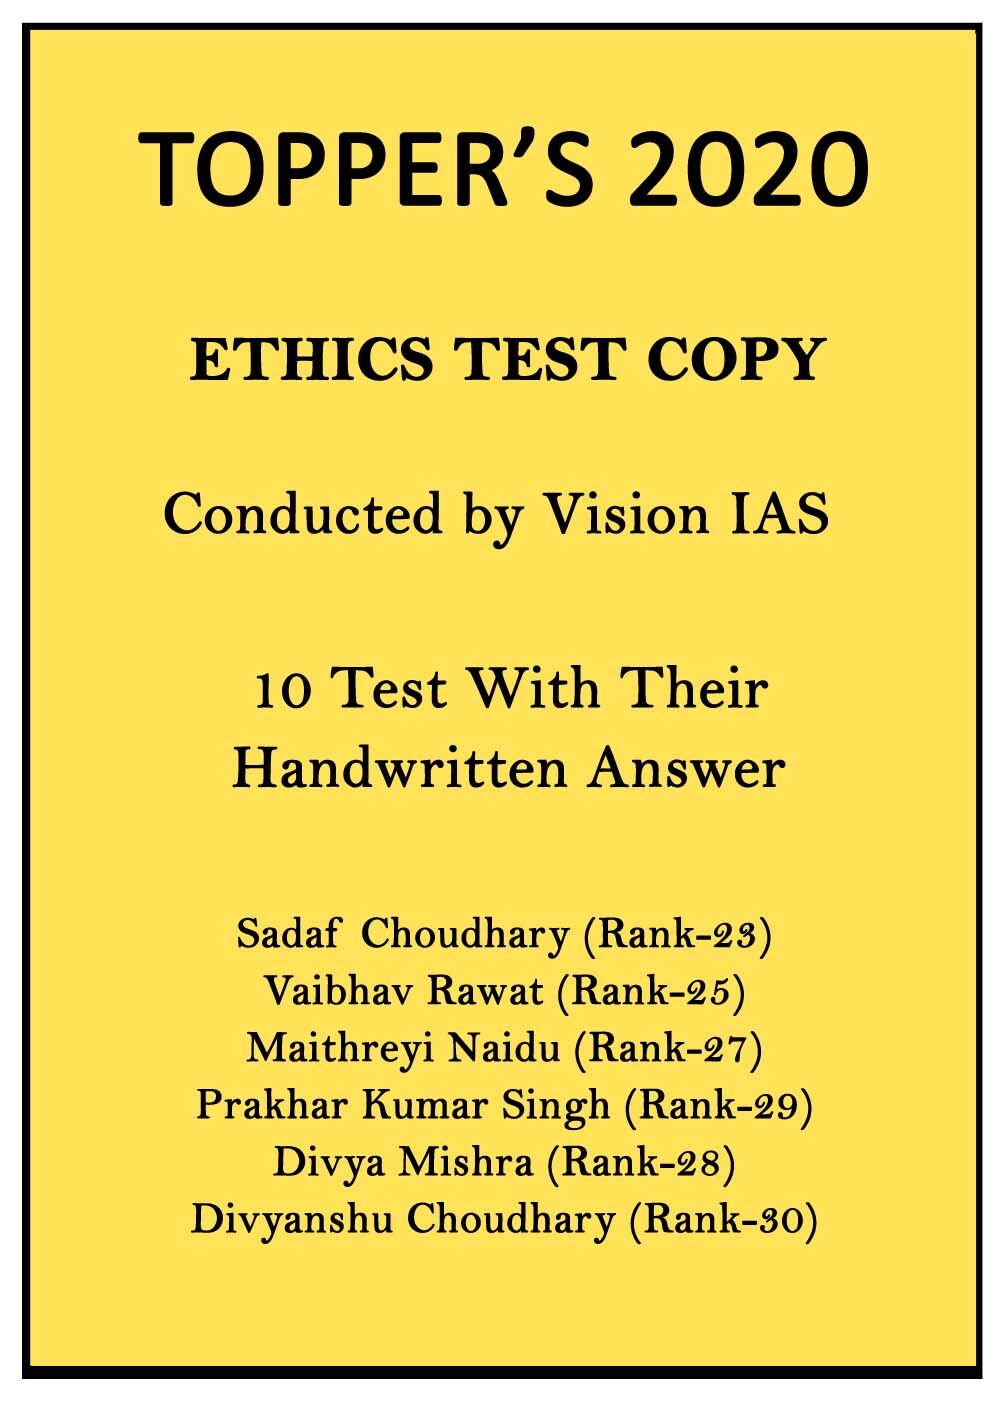 vision-ias-toppers-2020-ethics-10-test-copy-handwrittennotes-in-english-for-mains